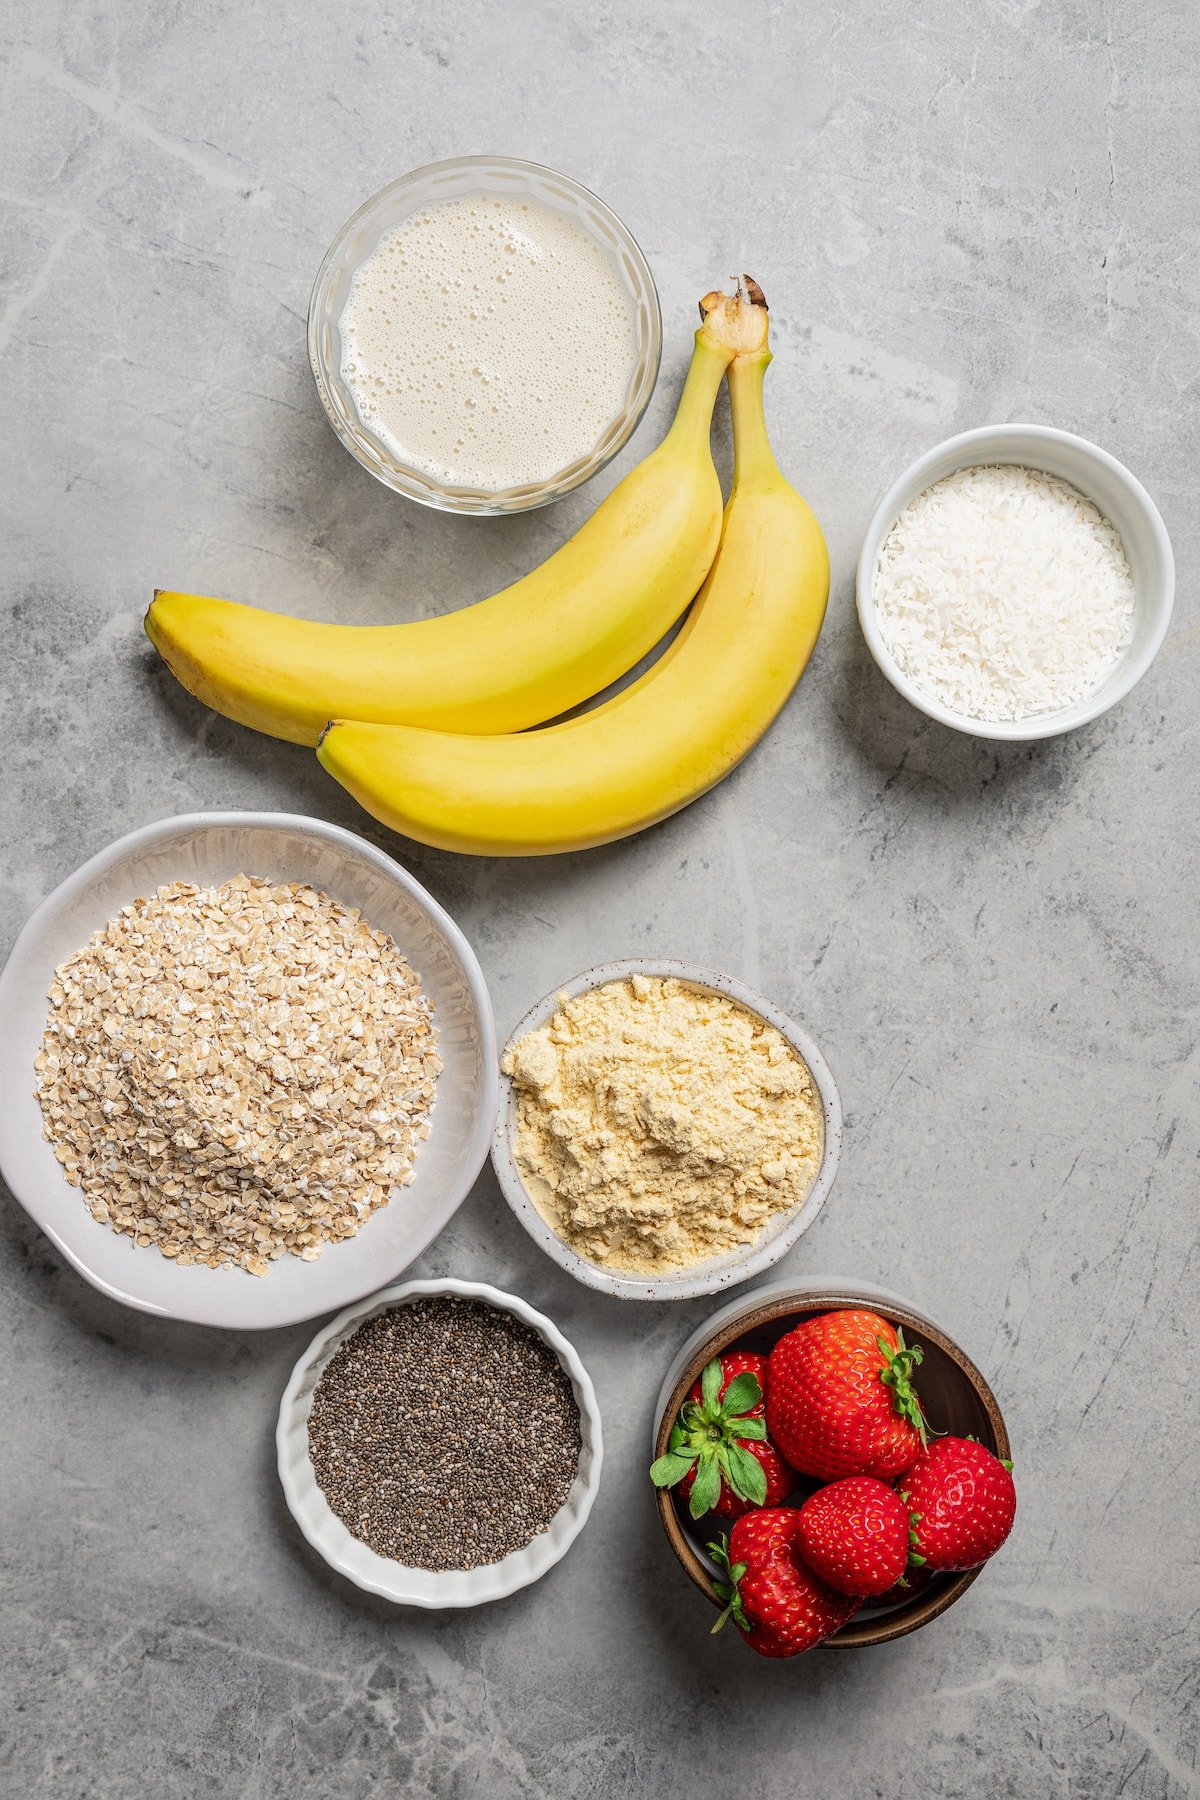 The ingredients for overnight protein oatmeal.